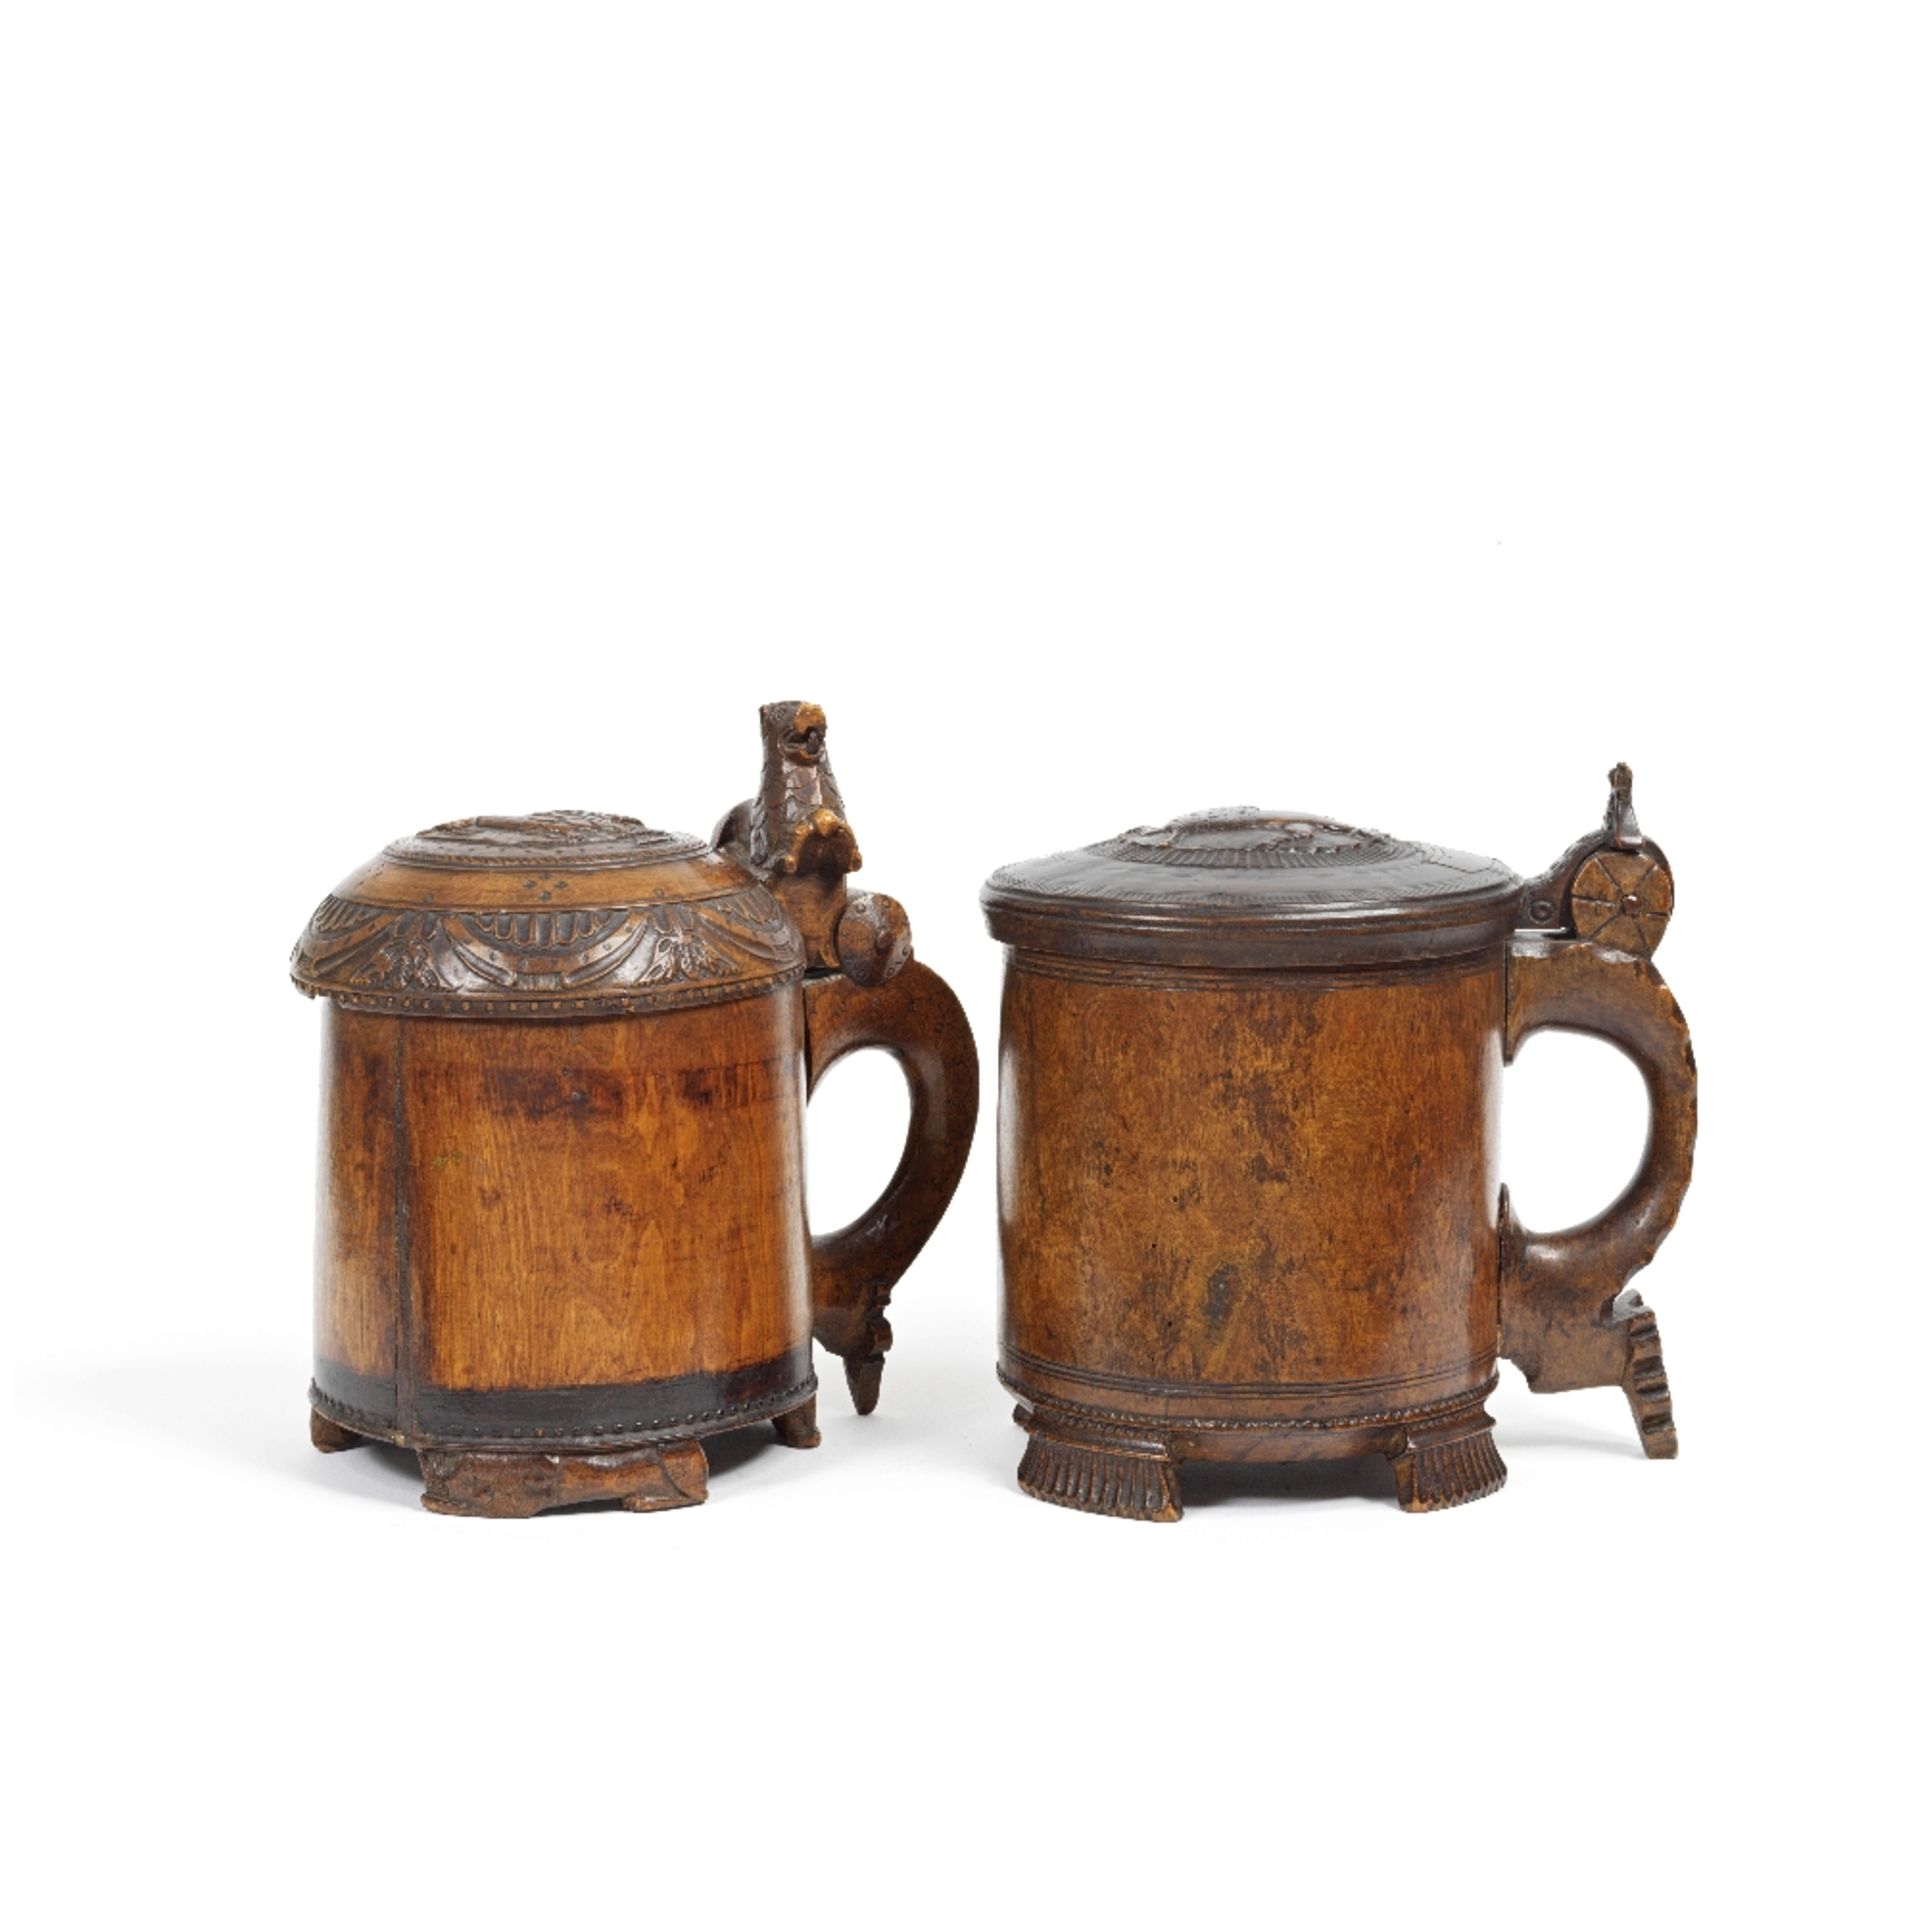 Two 18th century Norwegian carved and turned birch-wood tankards (2)